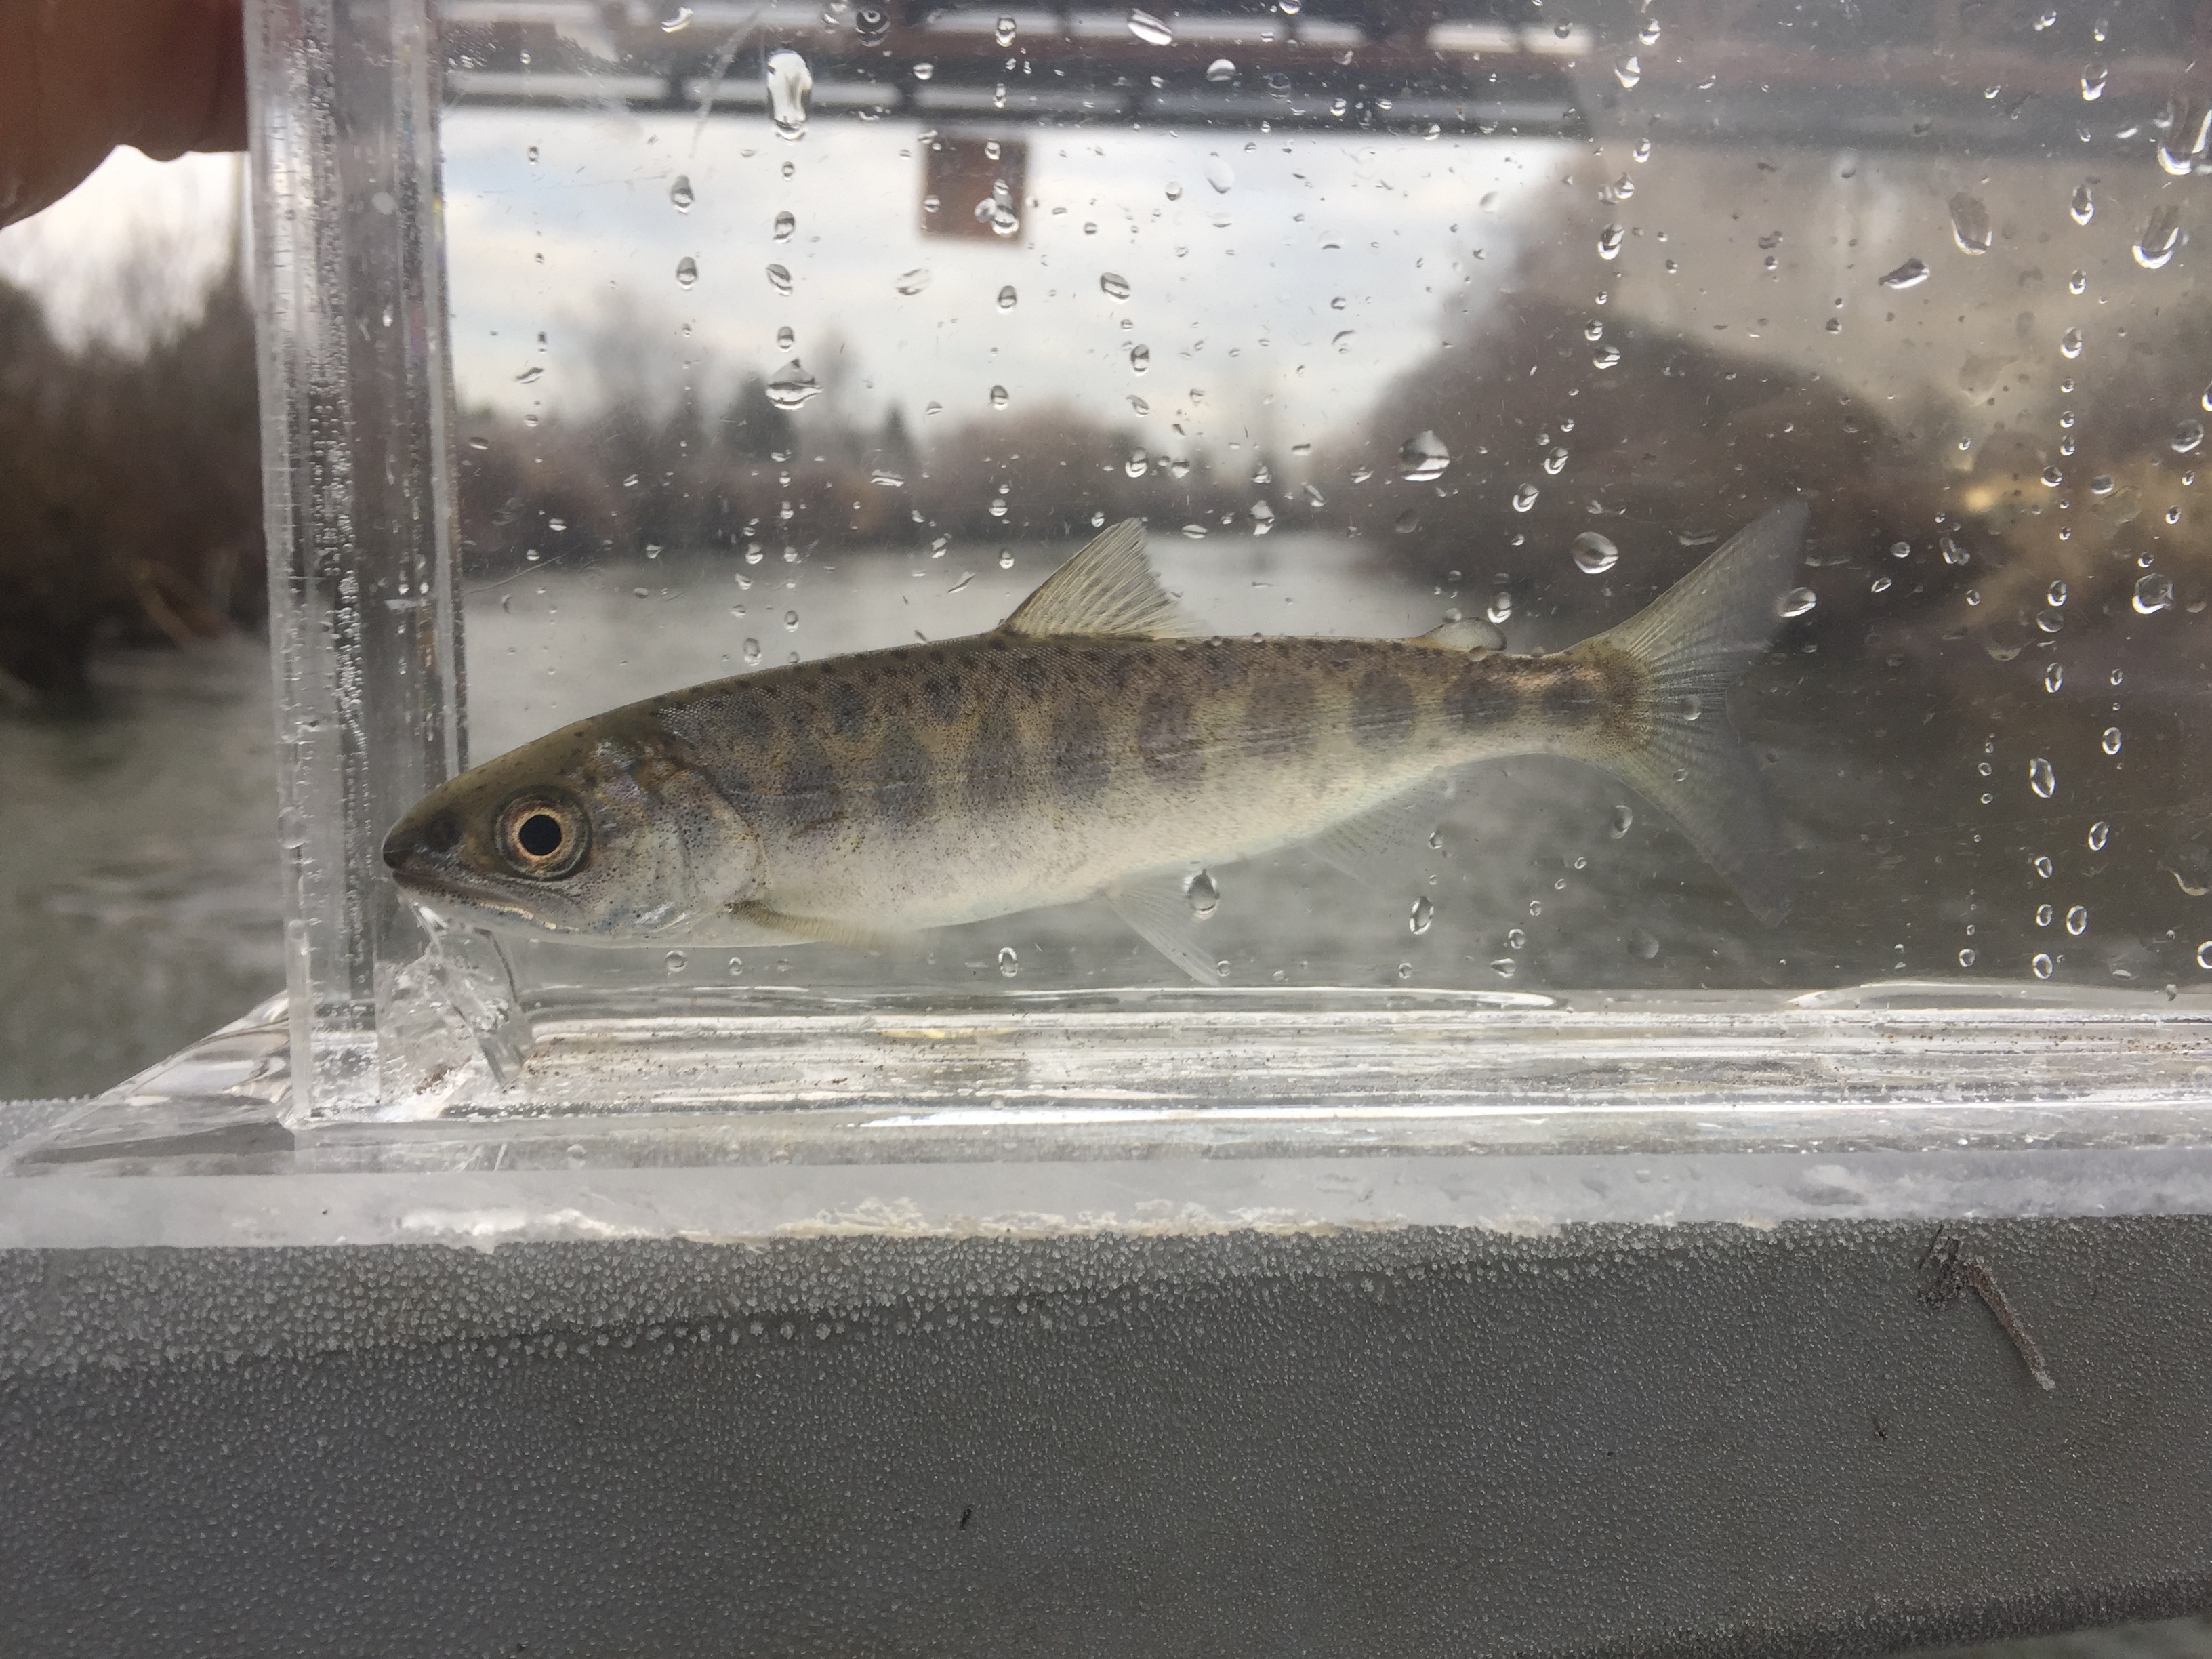 captured juvenile salmon in trap for data collection